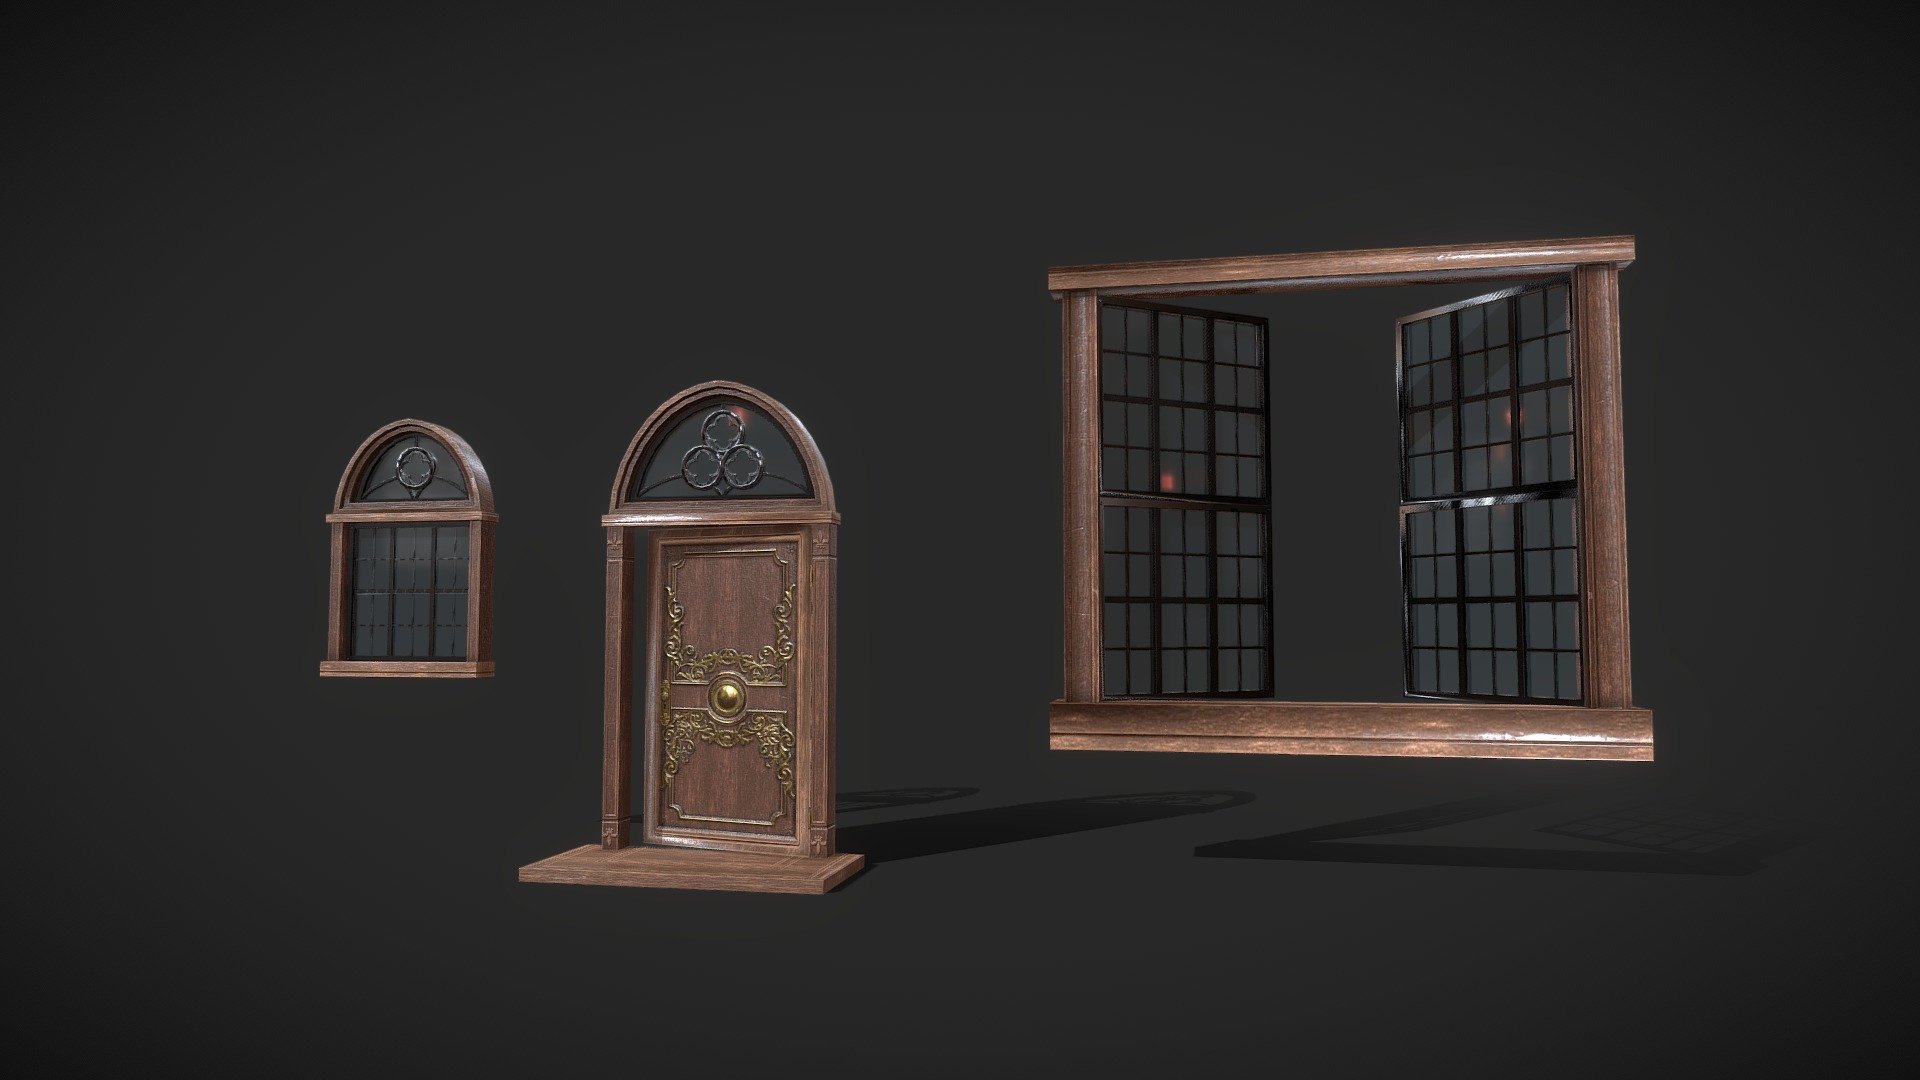 2 decorative windows and 1 door.

1 small window

1 big window ( can rotate left and right window panels to close and open)

1 door ( with hinges can rotate horizontally to open and close )

Total Polycount: 3369 Triangles

Big Window: 296 Triangles

Small Window: 783 Triangles

Door: 2290 Triangles

PNG Texture sizes:

Door: 2048 x 2048 (Include Albedo, Normal, Specular and AO)

Window: 1024 x 1024 (Include Albedo, Normal and Specular), AO 512 x 512 - Decor Window and Door - Buy Royalty Free 3D model by Experience Lab Art (@Experience_Lab_Art) 3d model